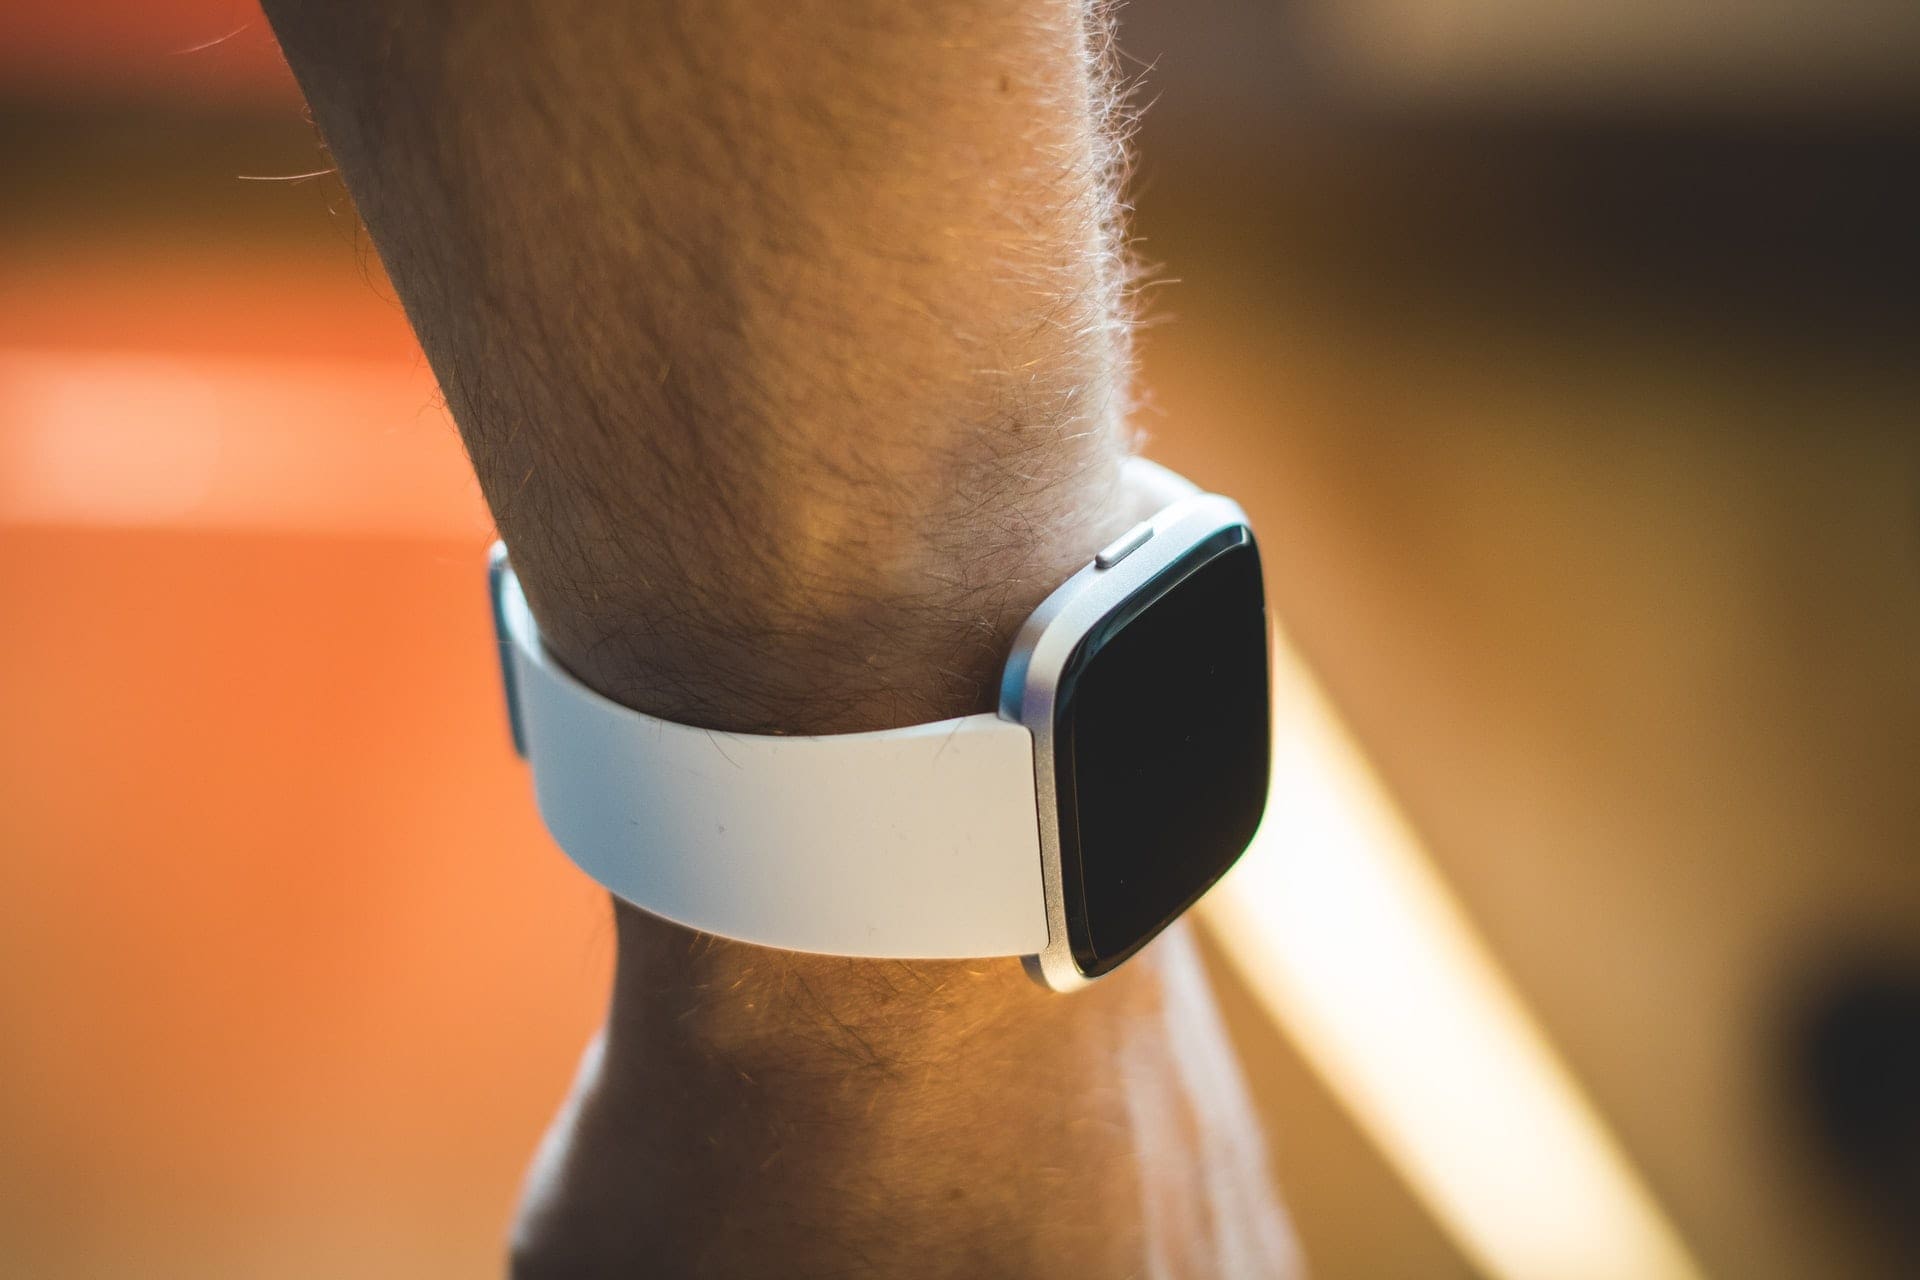 will a fitbit work with an android phone